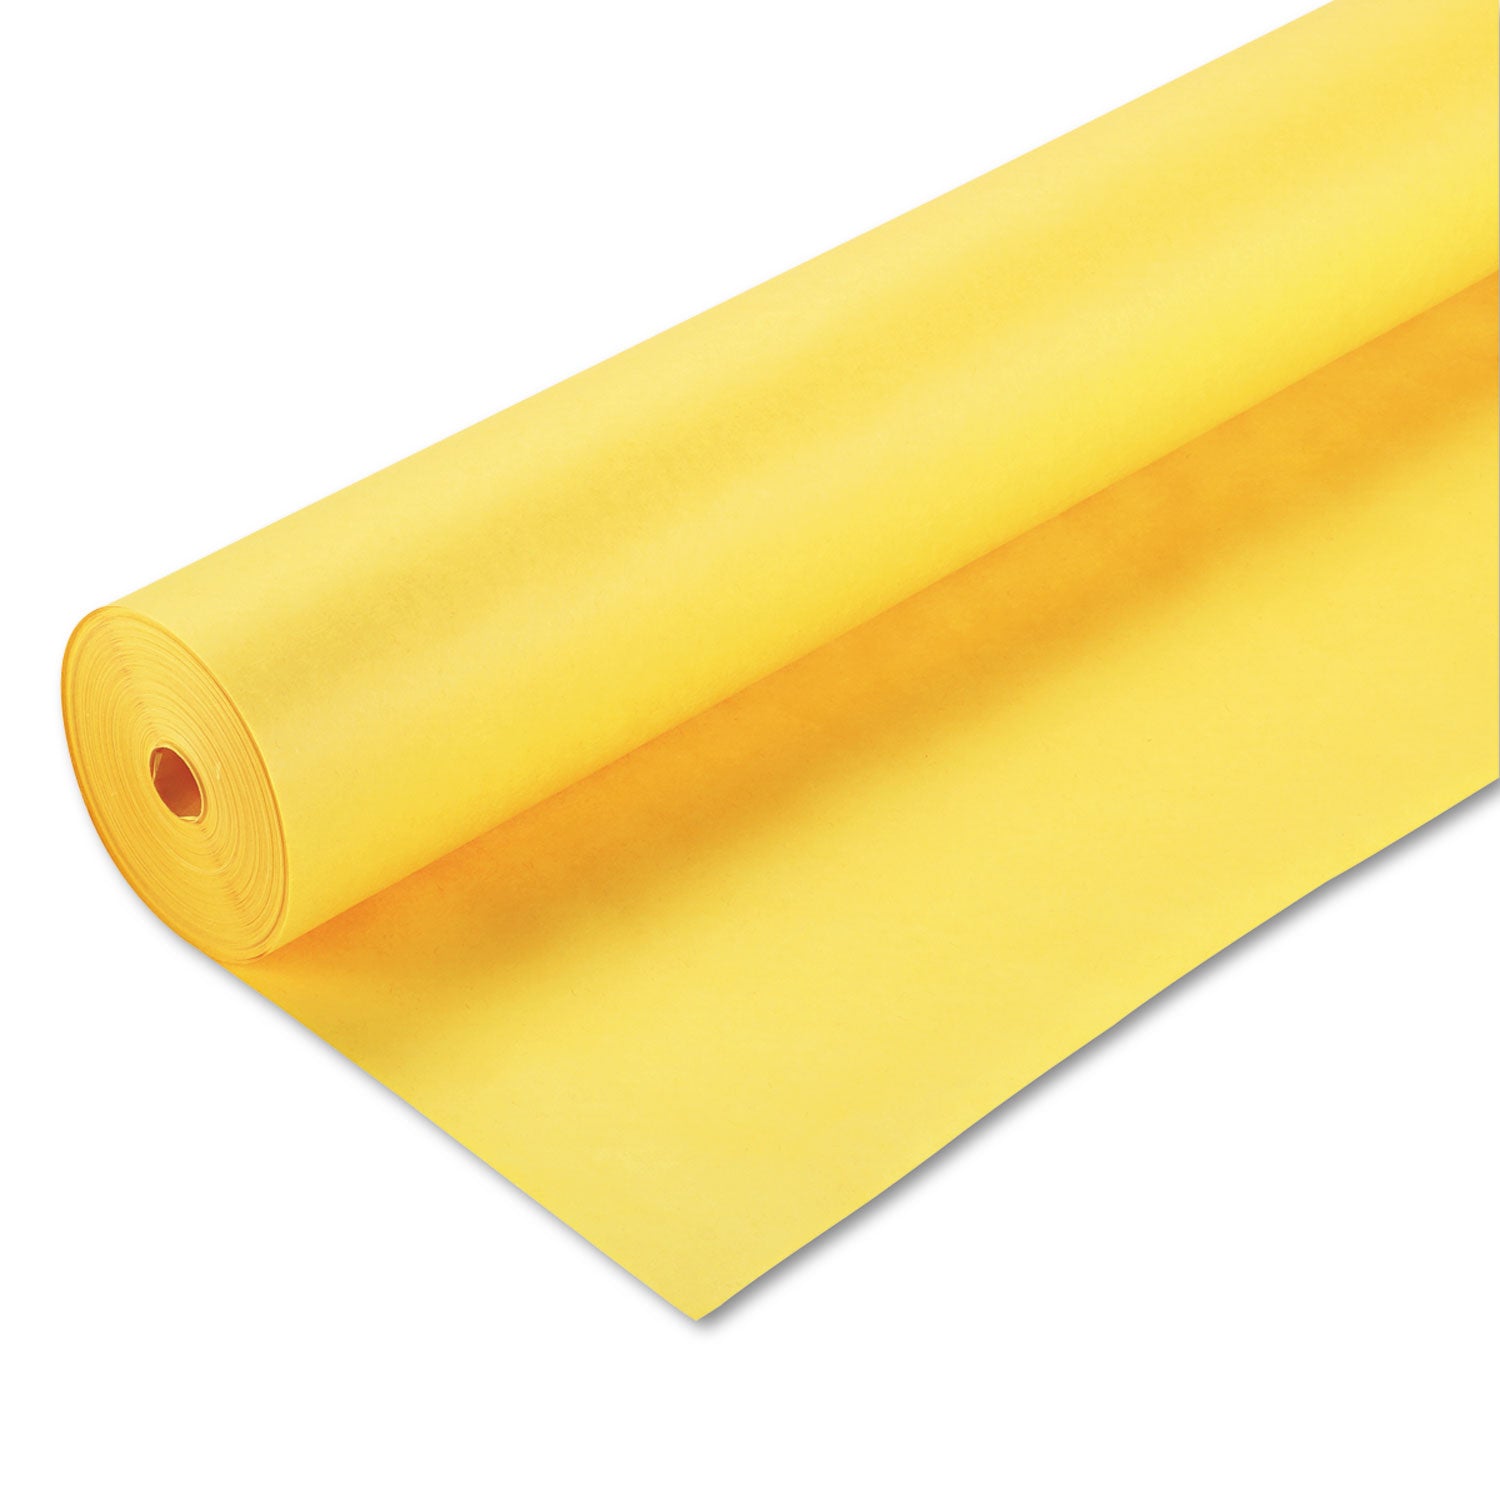 spectra-artkraft-duo-finish-paper-48-lb-text-weight-48-x-200-ft-canary-yellow_pac67084 - 1